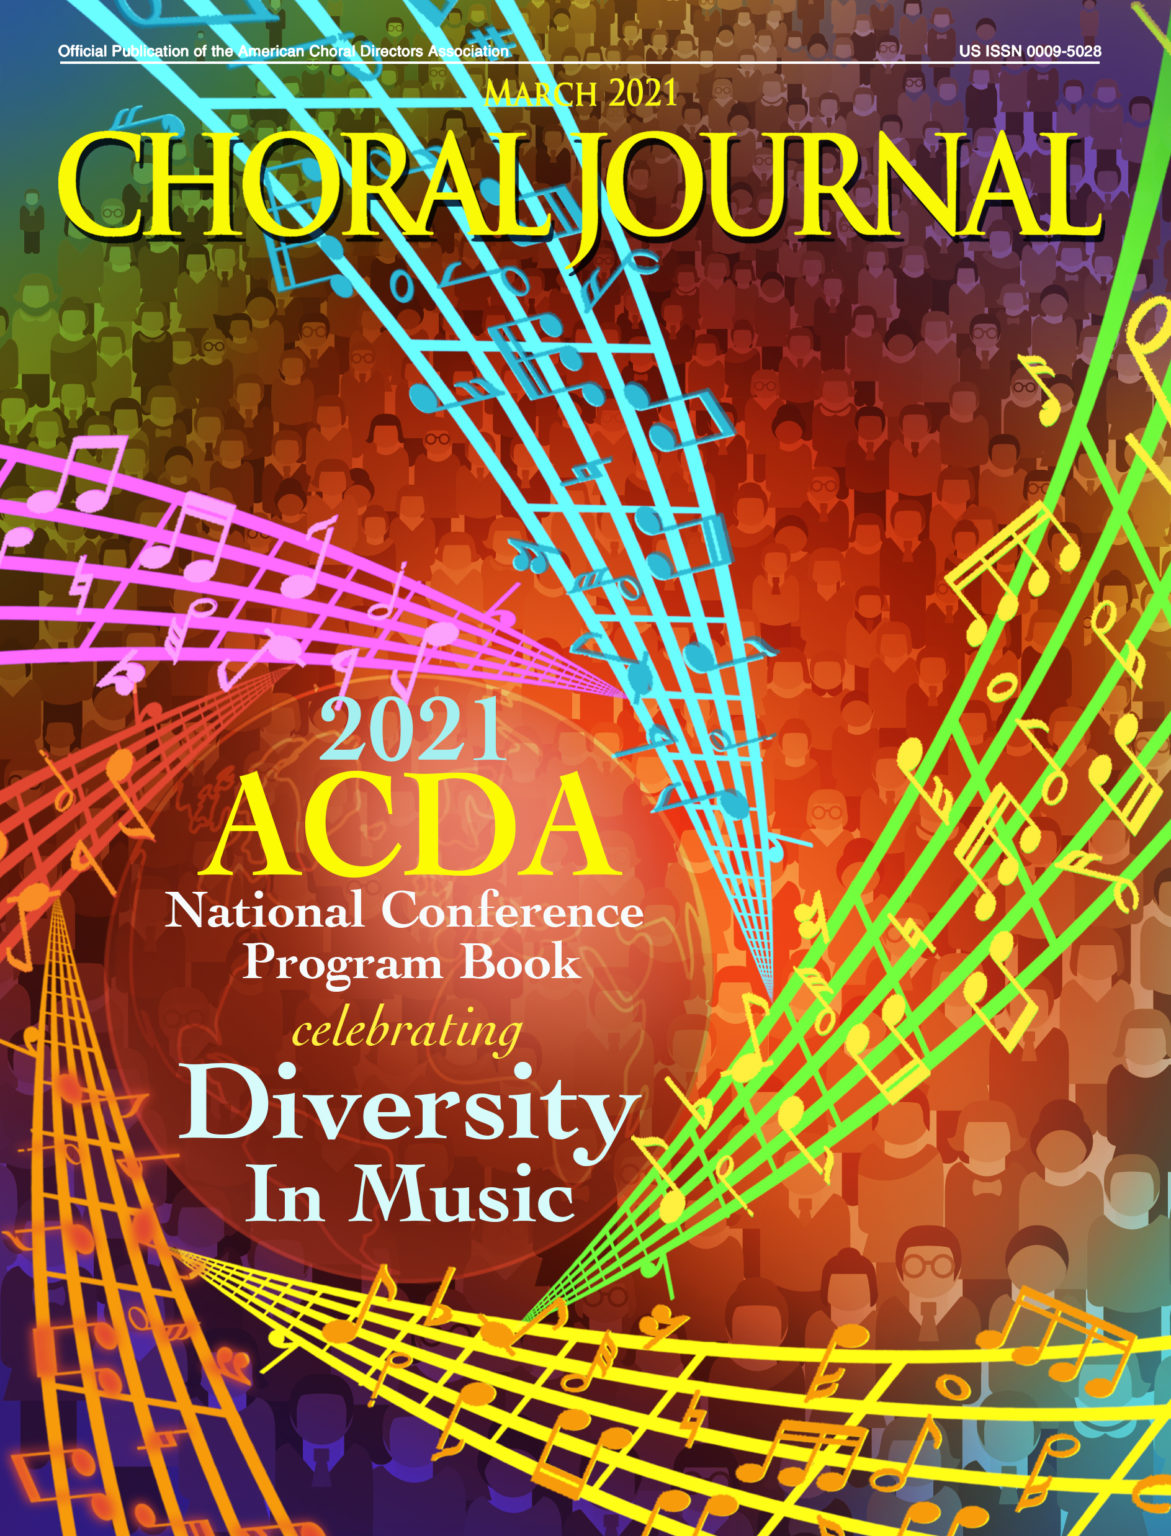 ACDA 2021 National Conference Program Book